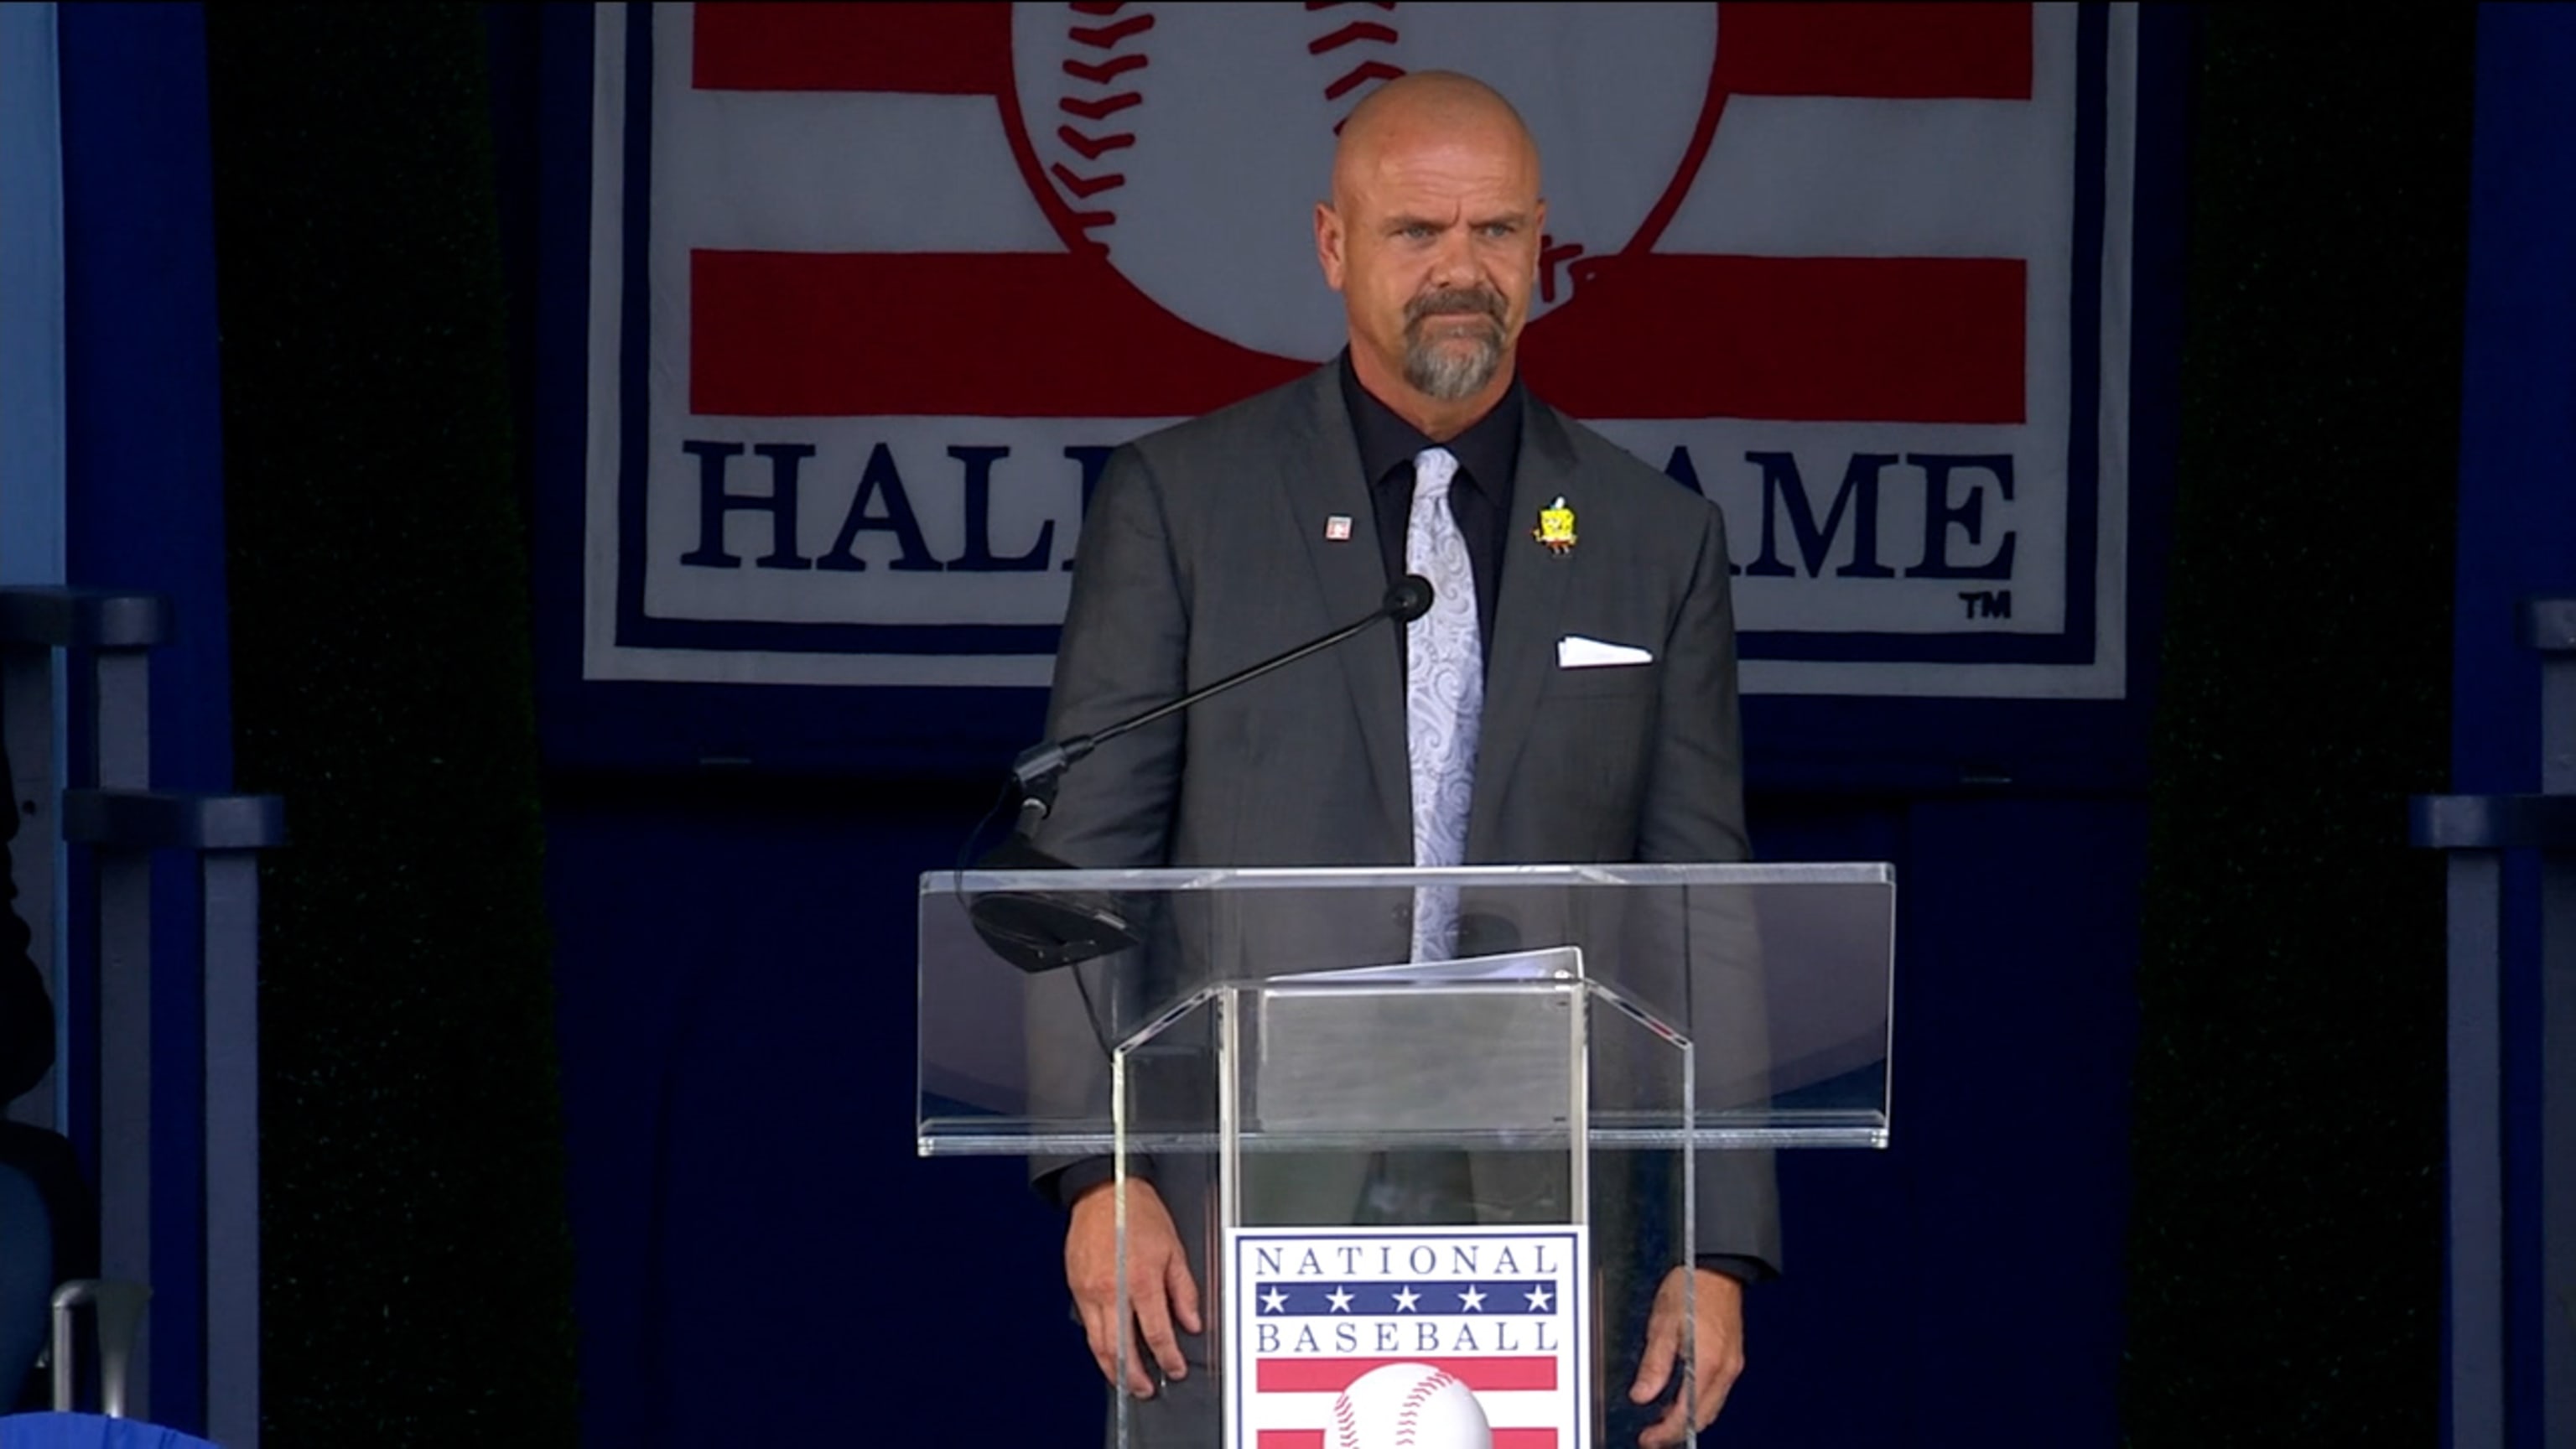 Rockies to retire Larry Walker's No. 33, joining one other